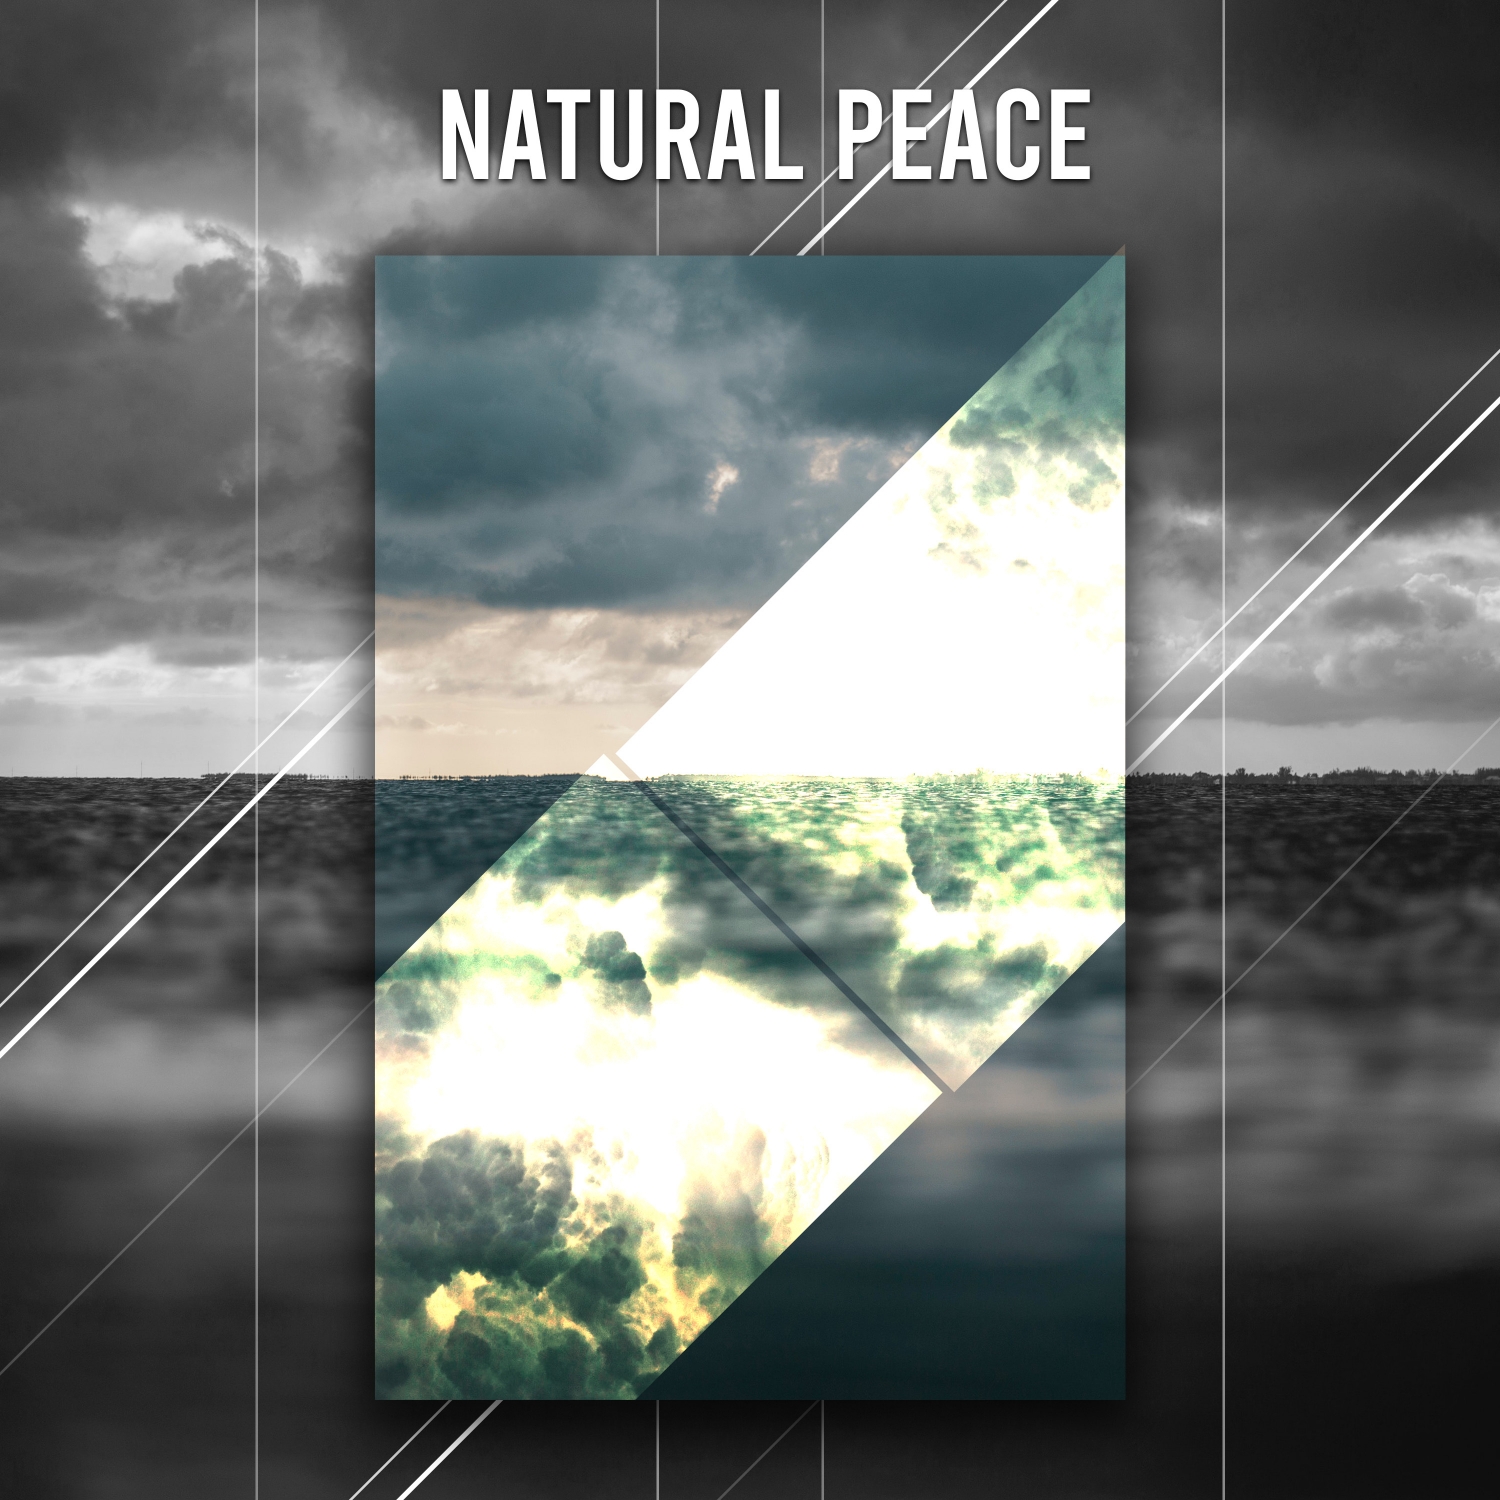 13 White Noise and Nature Sounds for Natural Peace